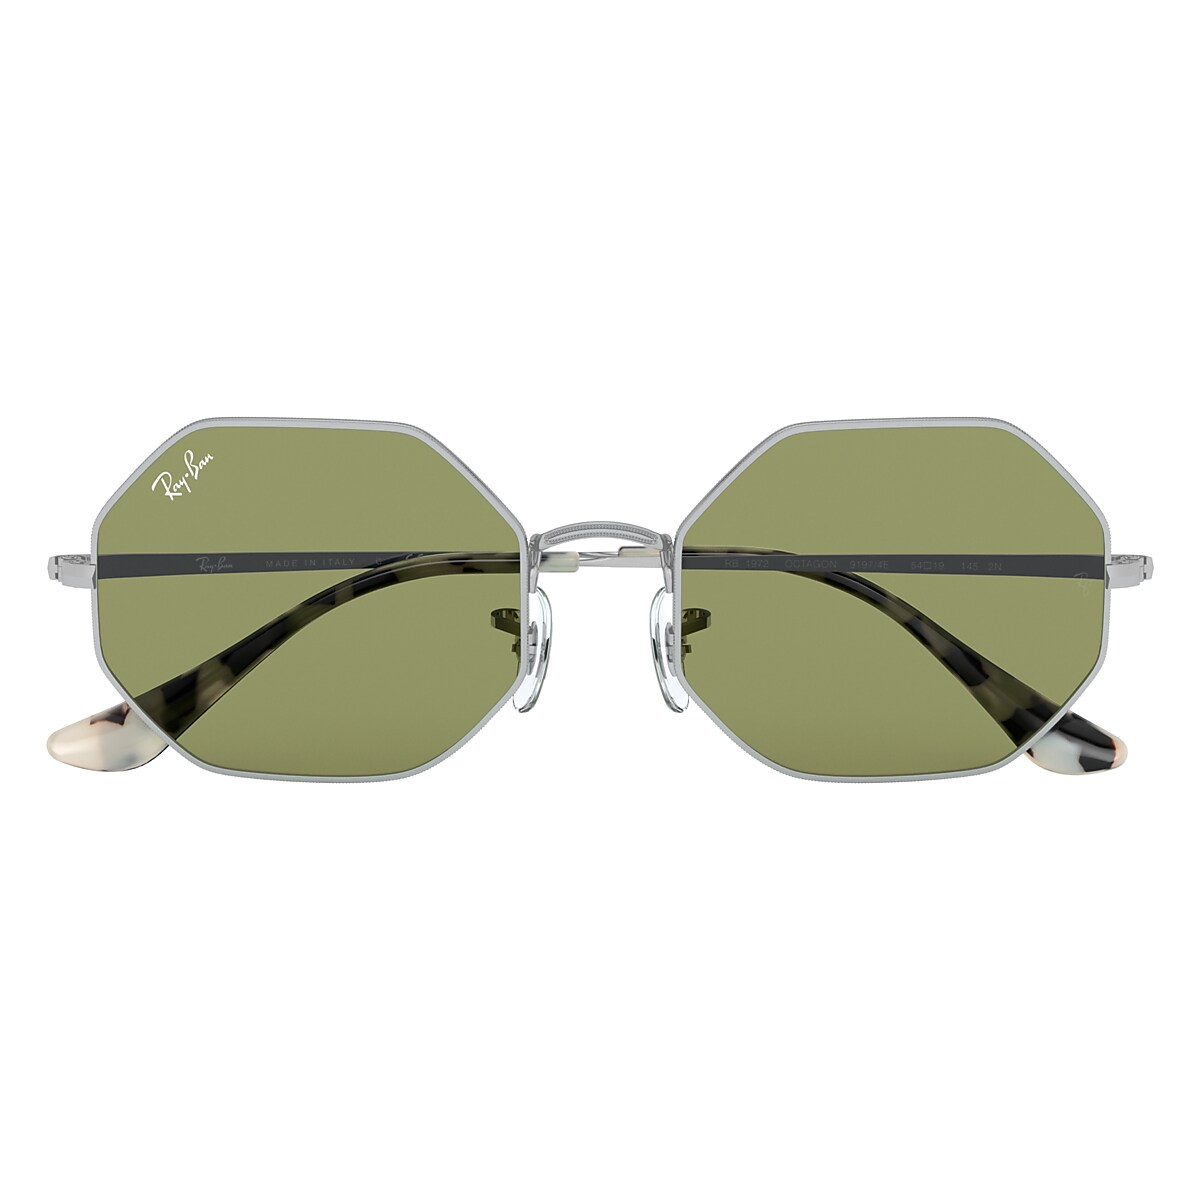 1972 Sunglasses in Silver and Green - RB1972 | Ray-Ban® EU